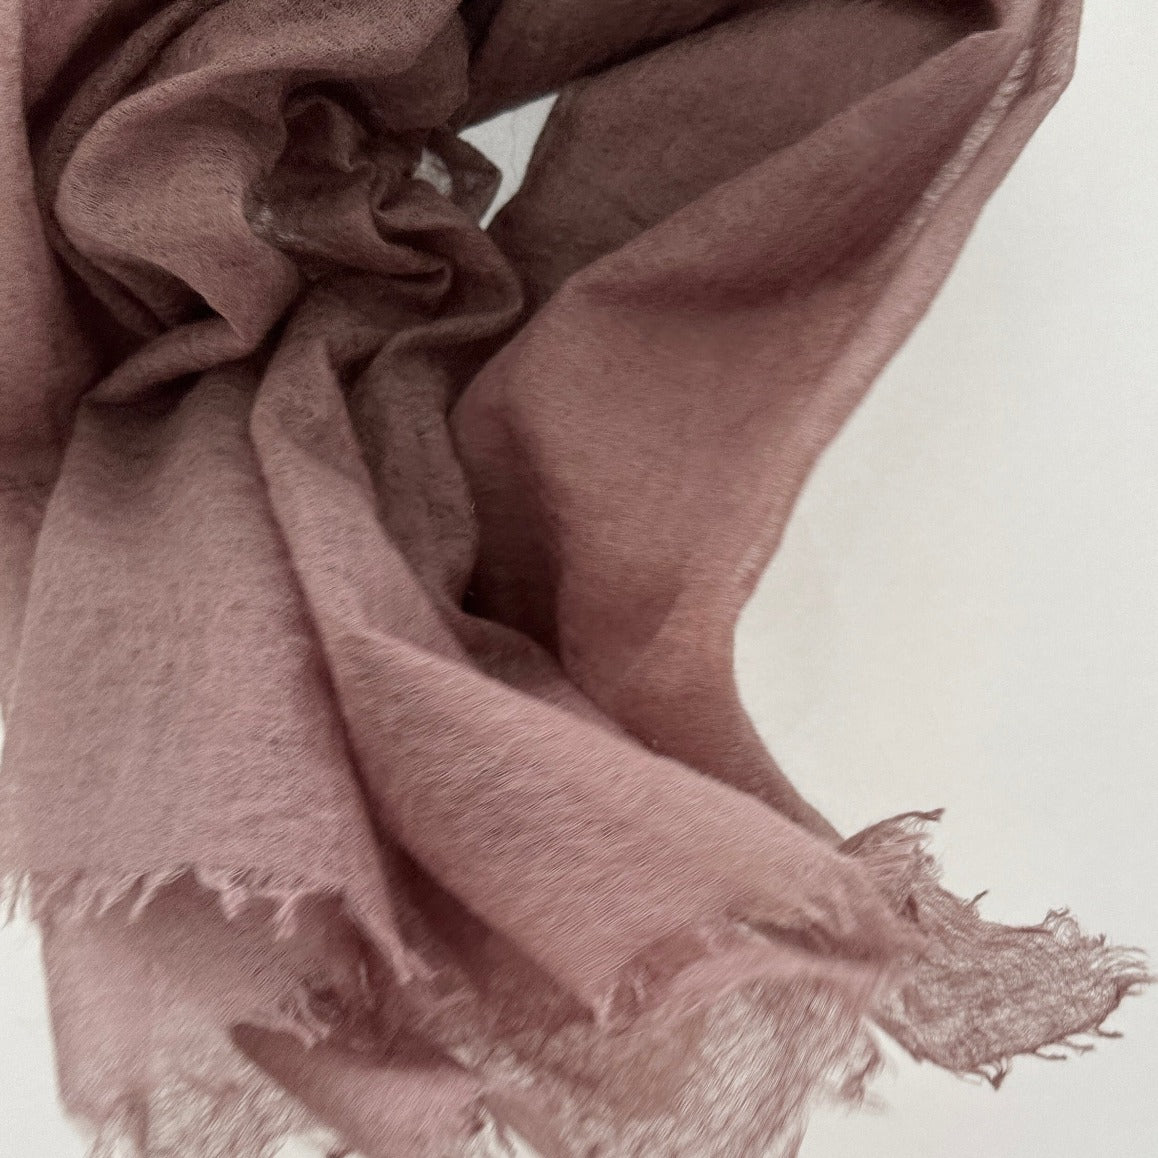 marmee taupe scarf in the air